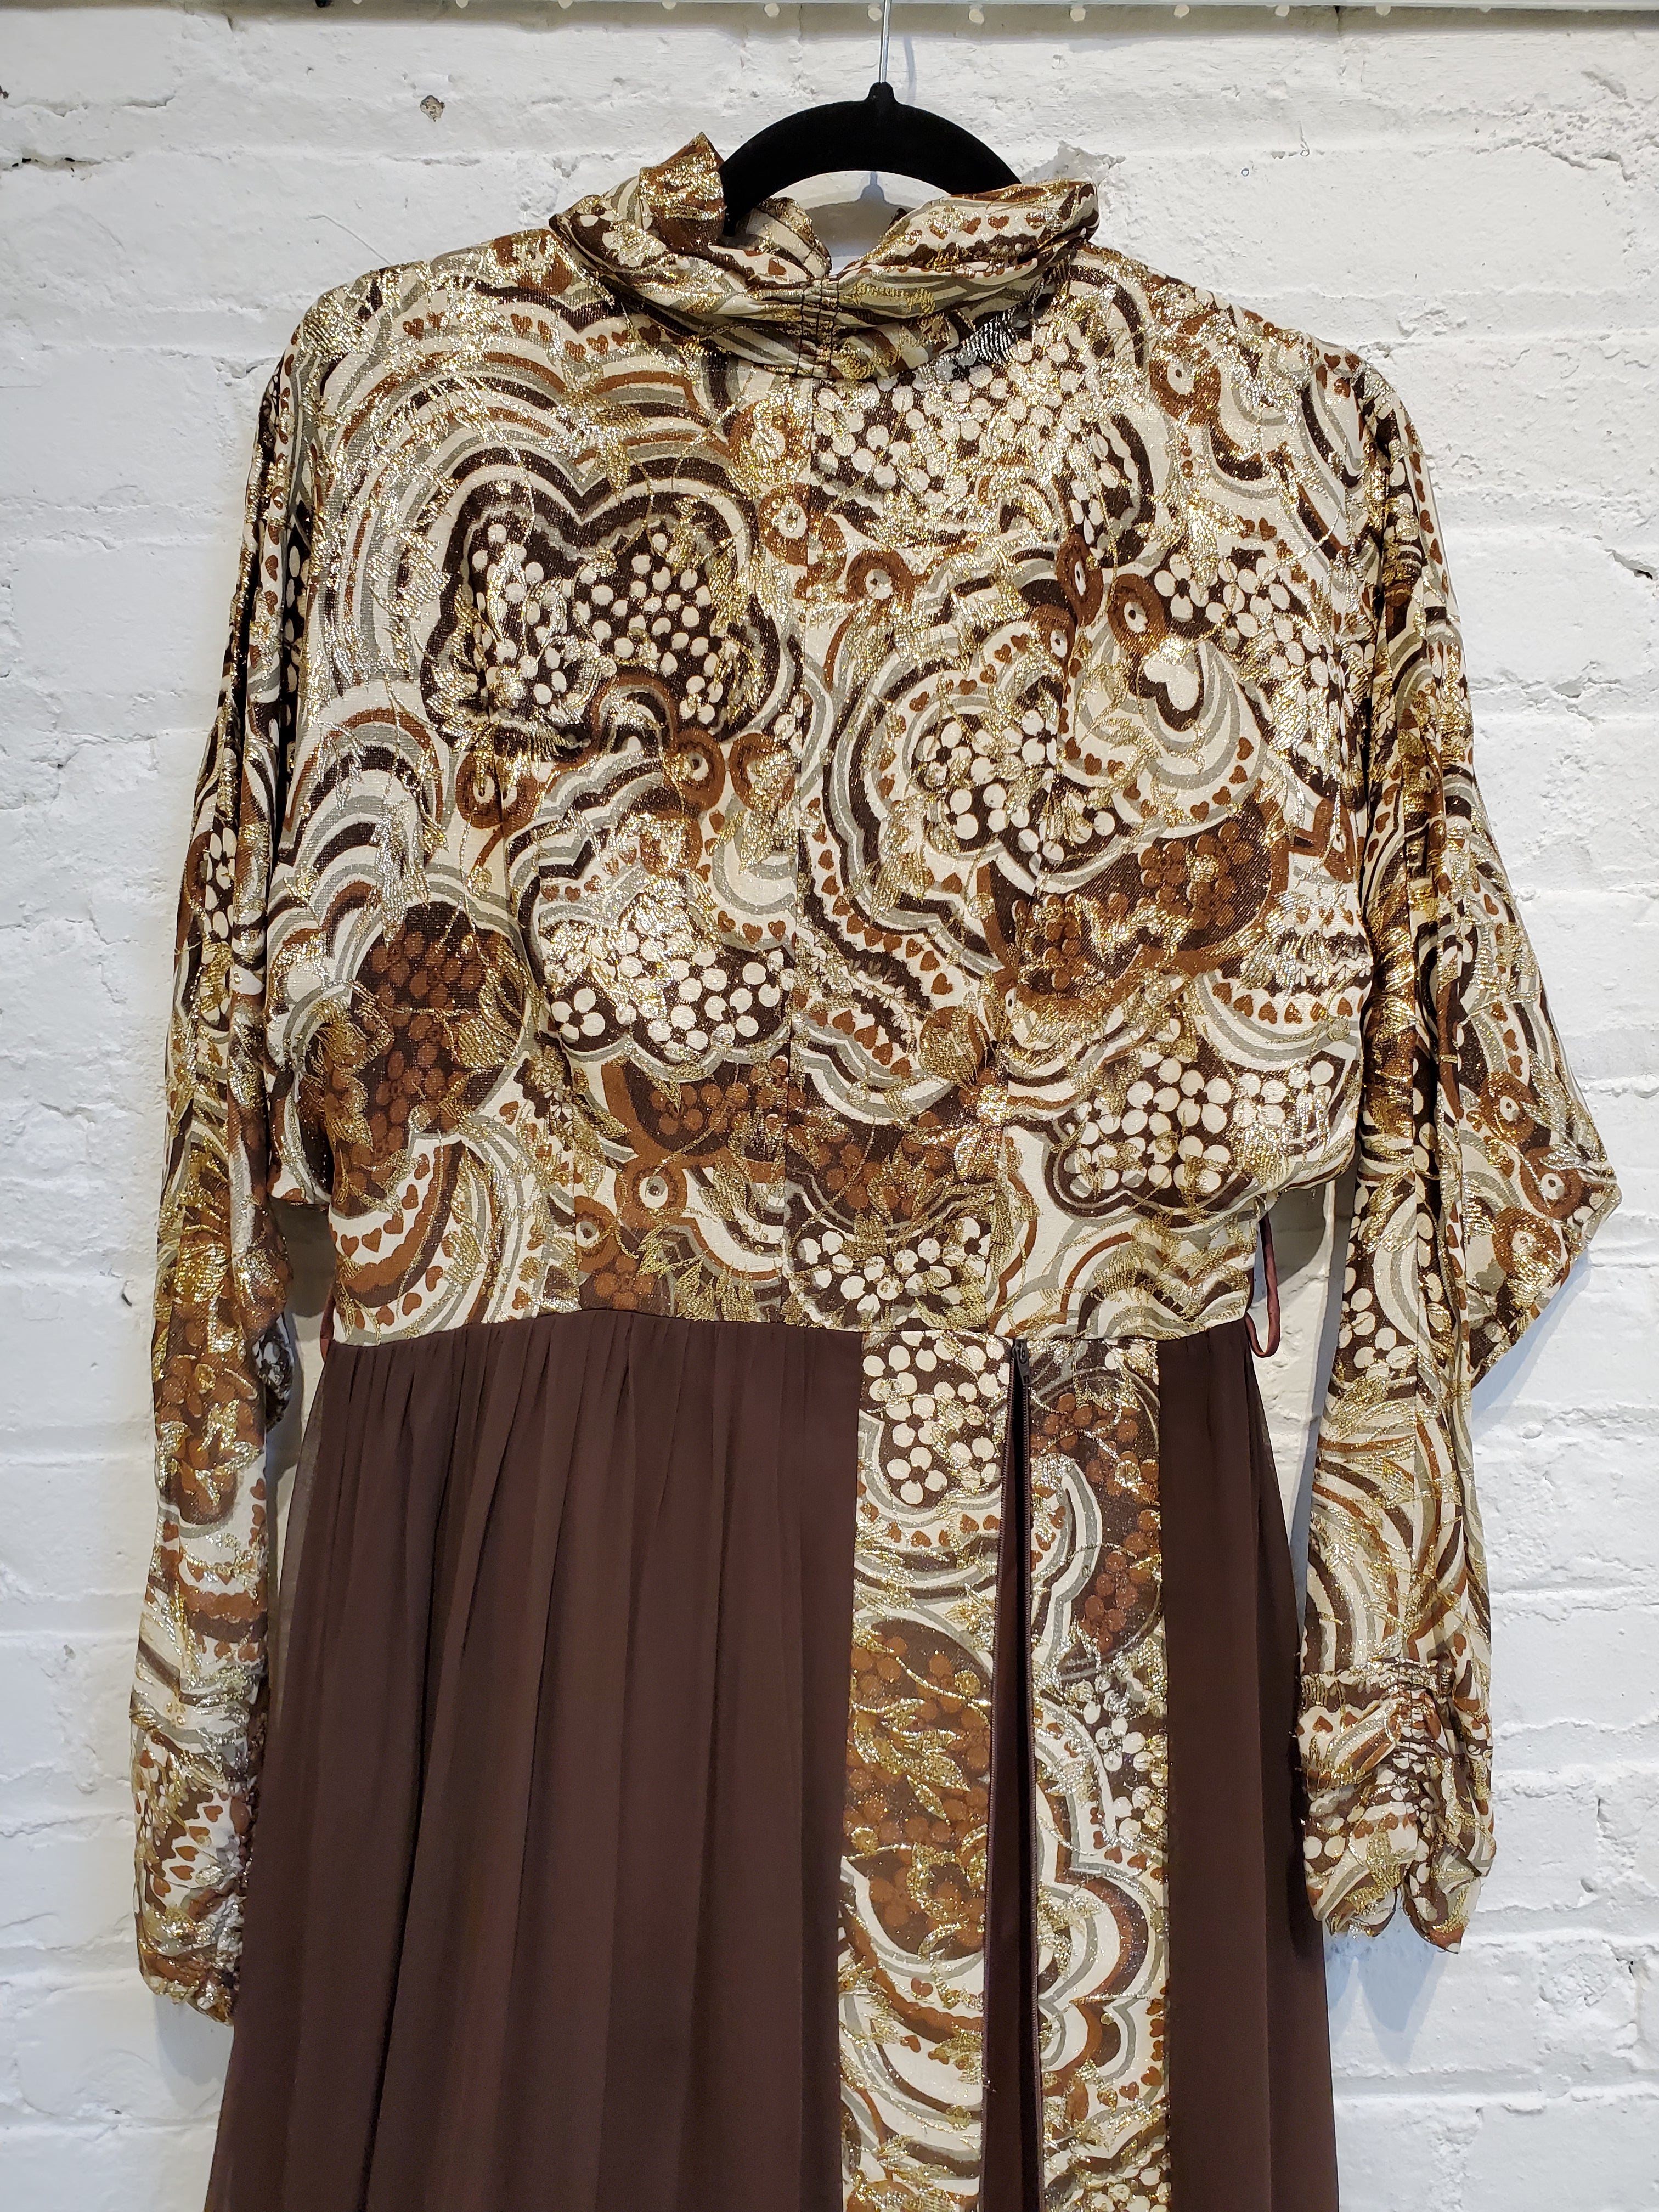 Vintage 1970s Brown Metallic Brocade Fabric Bodice, Sleeves & Trim Long Dress with Hot Pants (shorts)